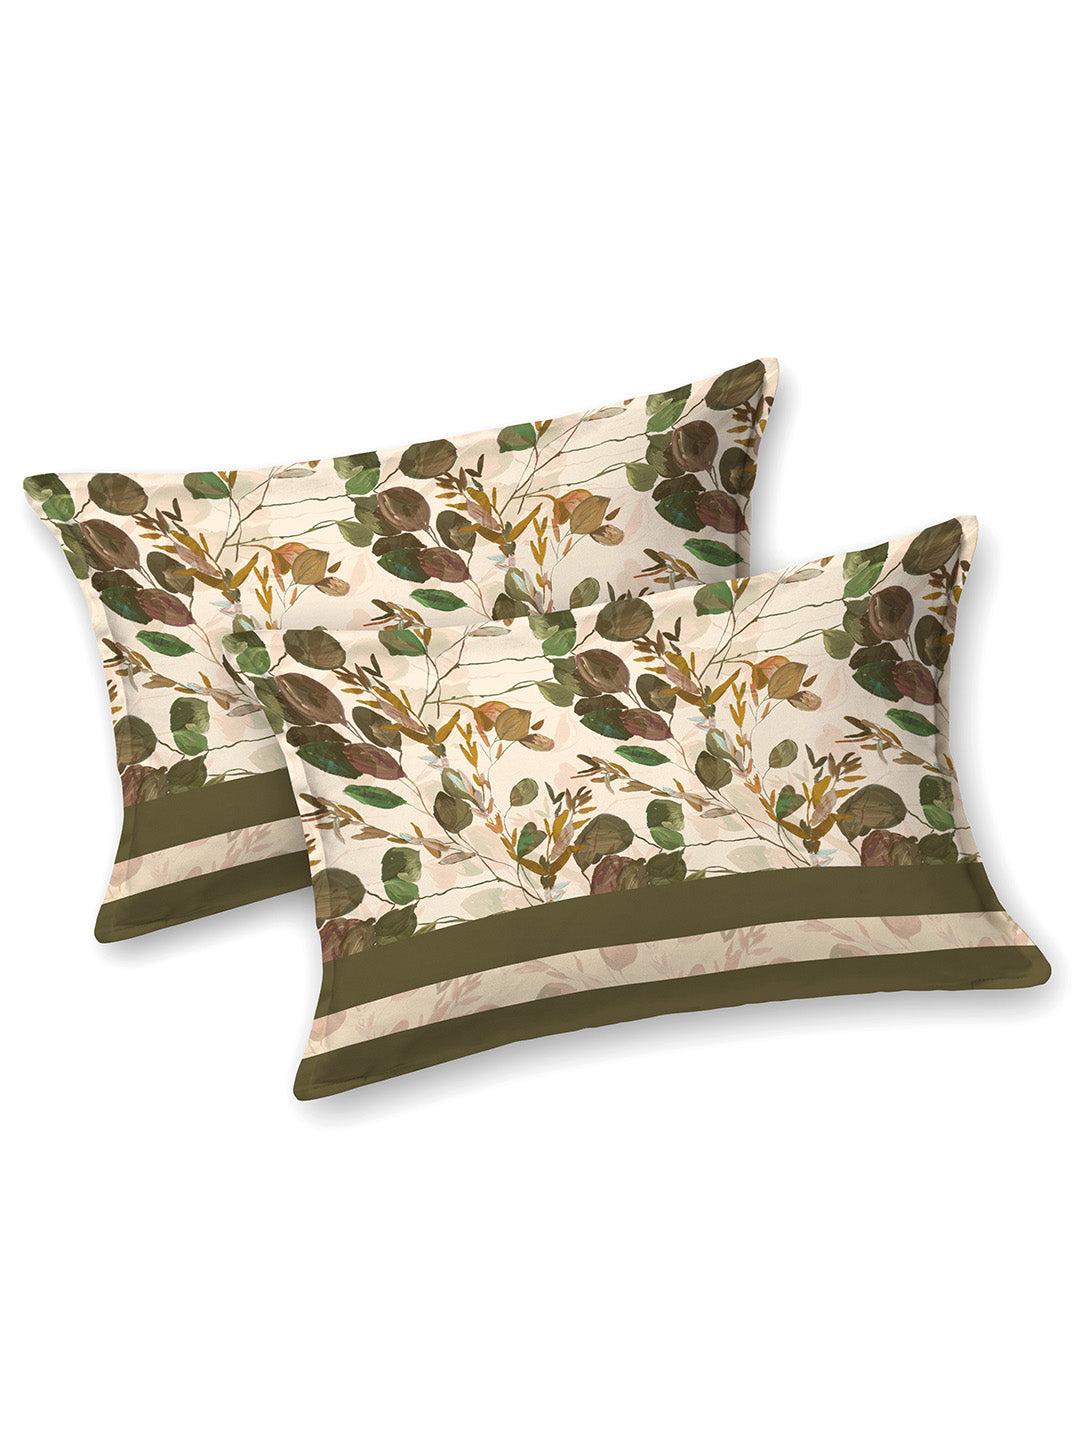 Beige and Green Floral Print Double King Cotton Bed Cover/Bed Spread